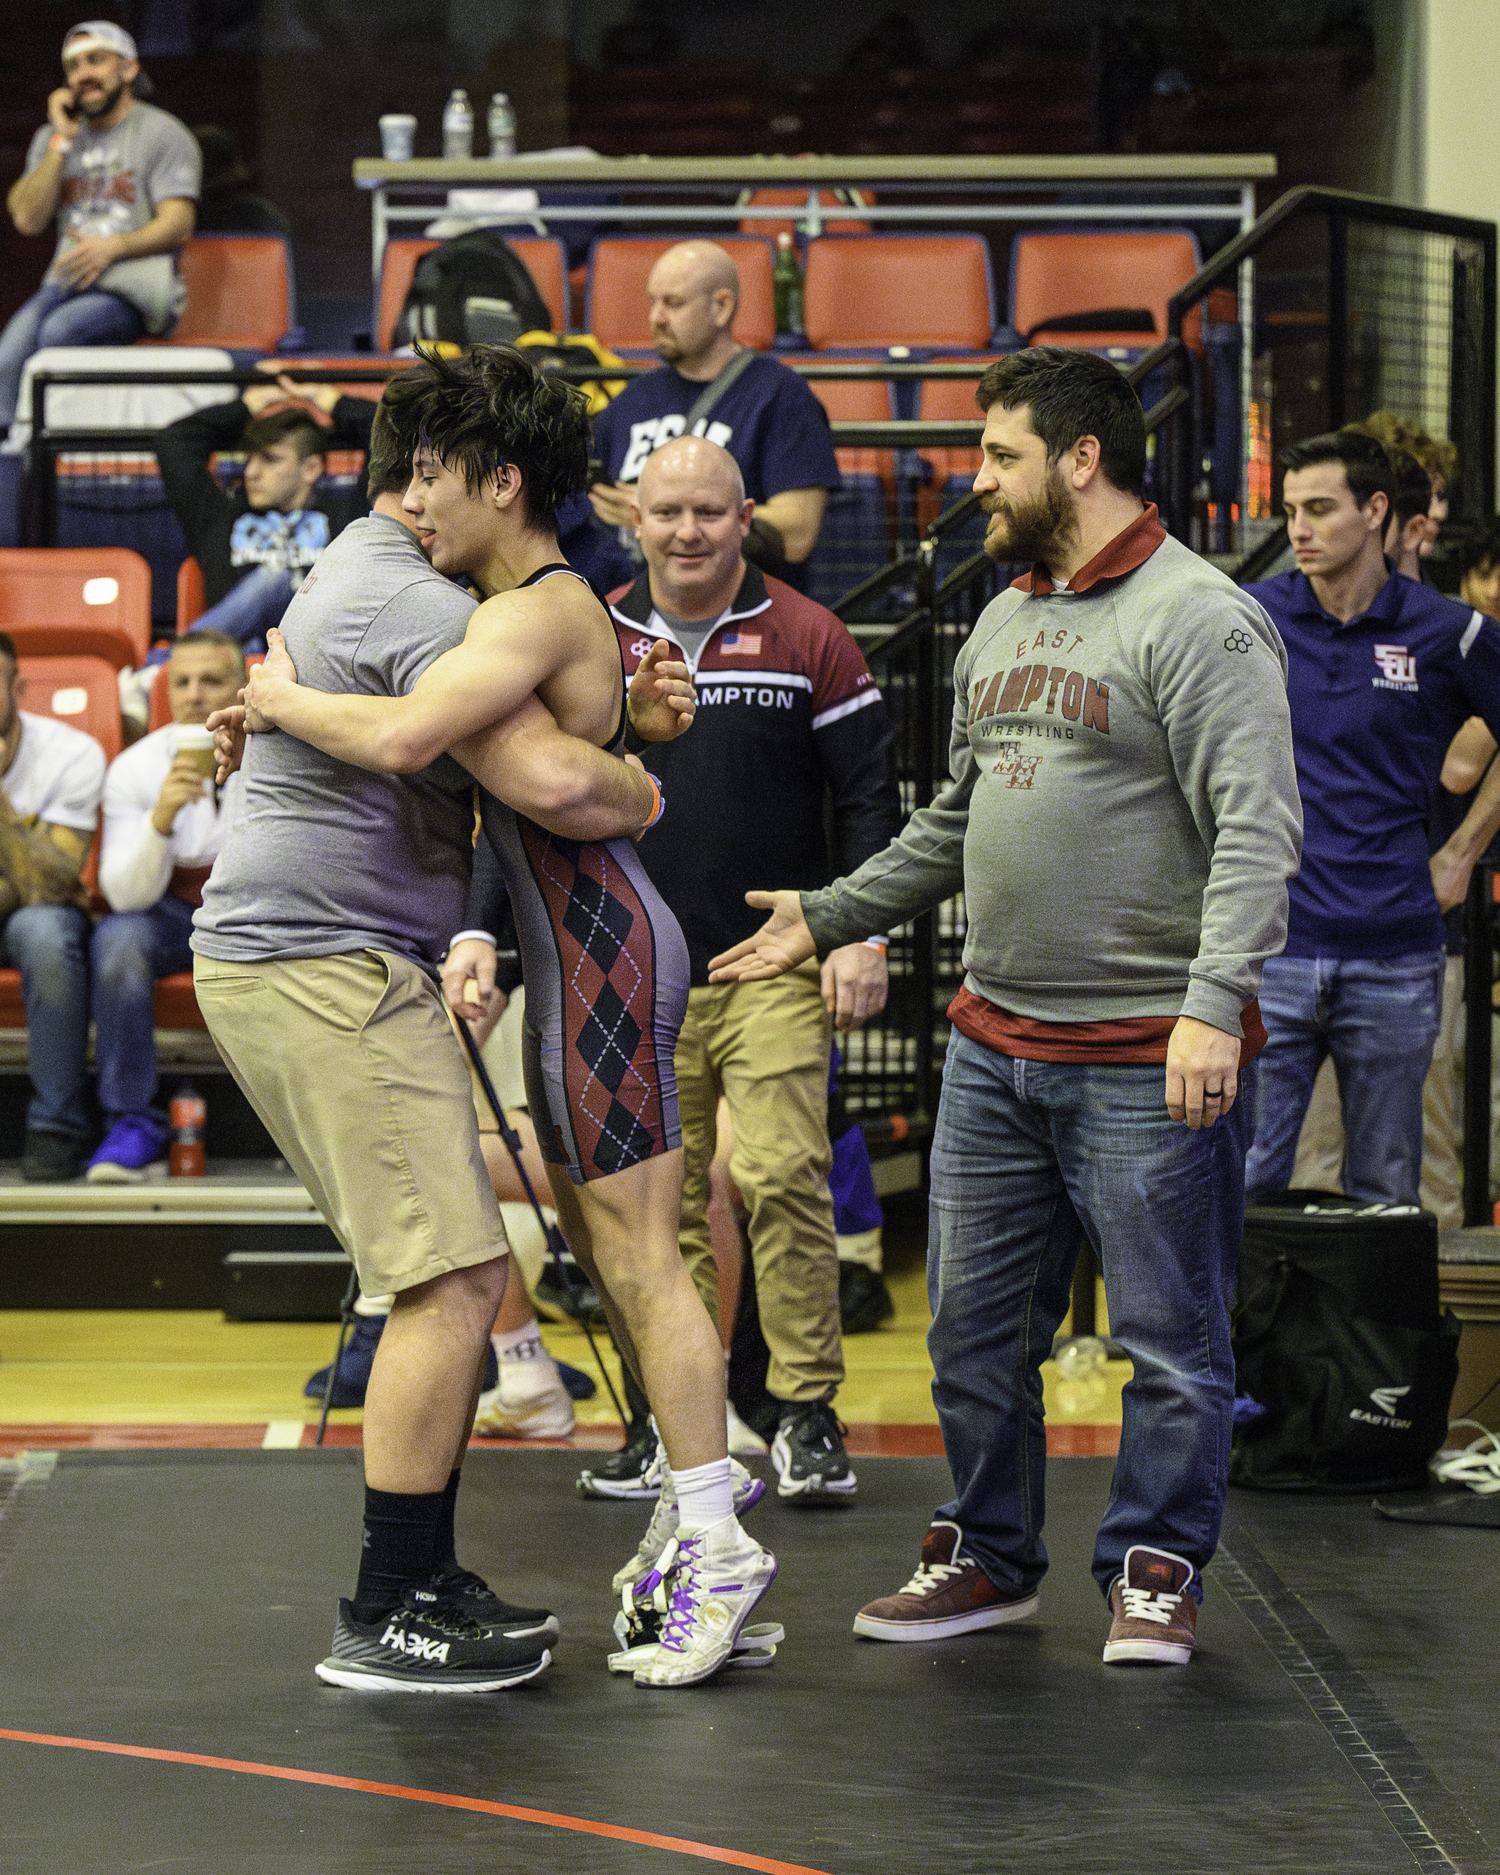 East Hampton junior Juan Roque gets a hug from head coach Ethan Mitchell and is congratulated by his assistant coaches after winning his quarterfinals match on Saturday.   MARIANNE BARNETT